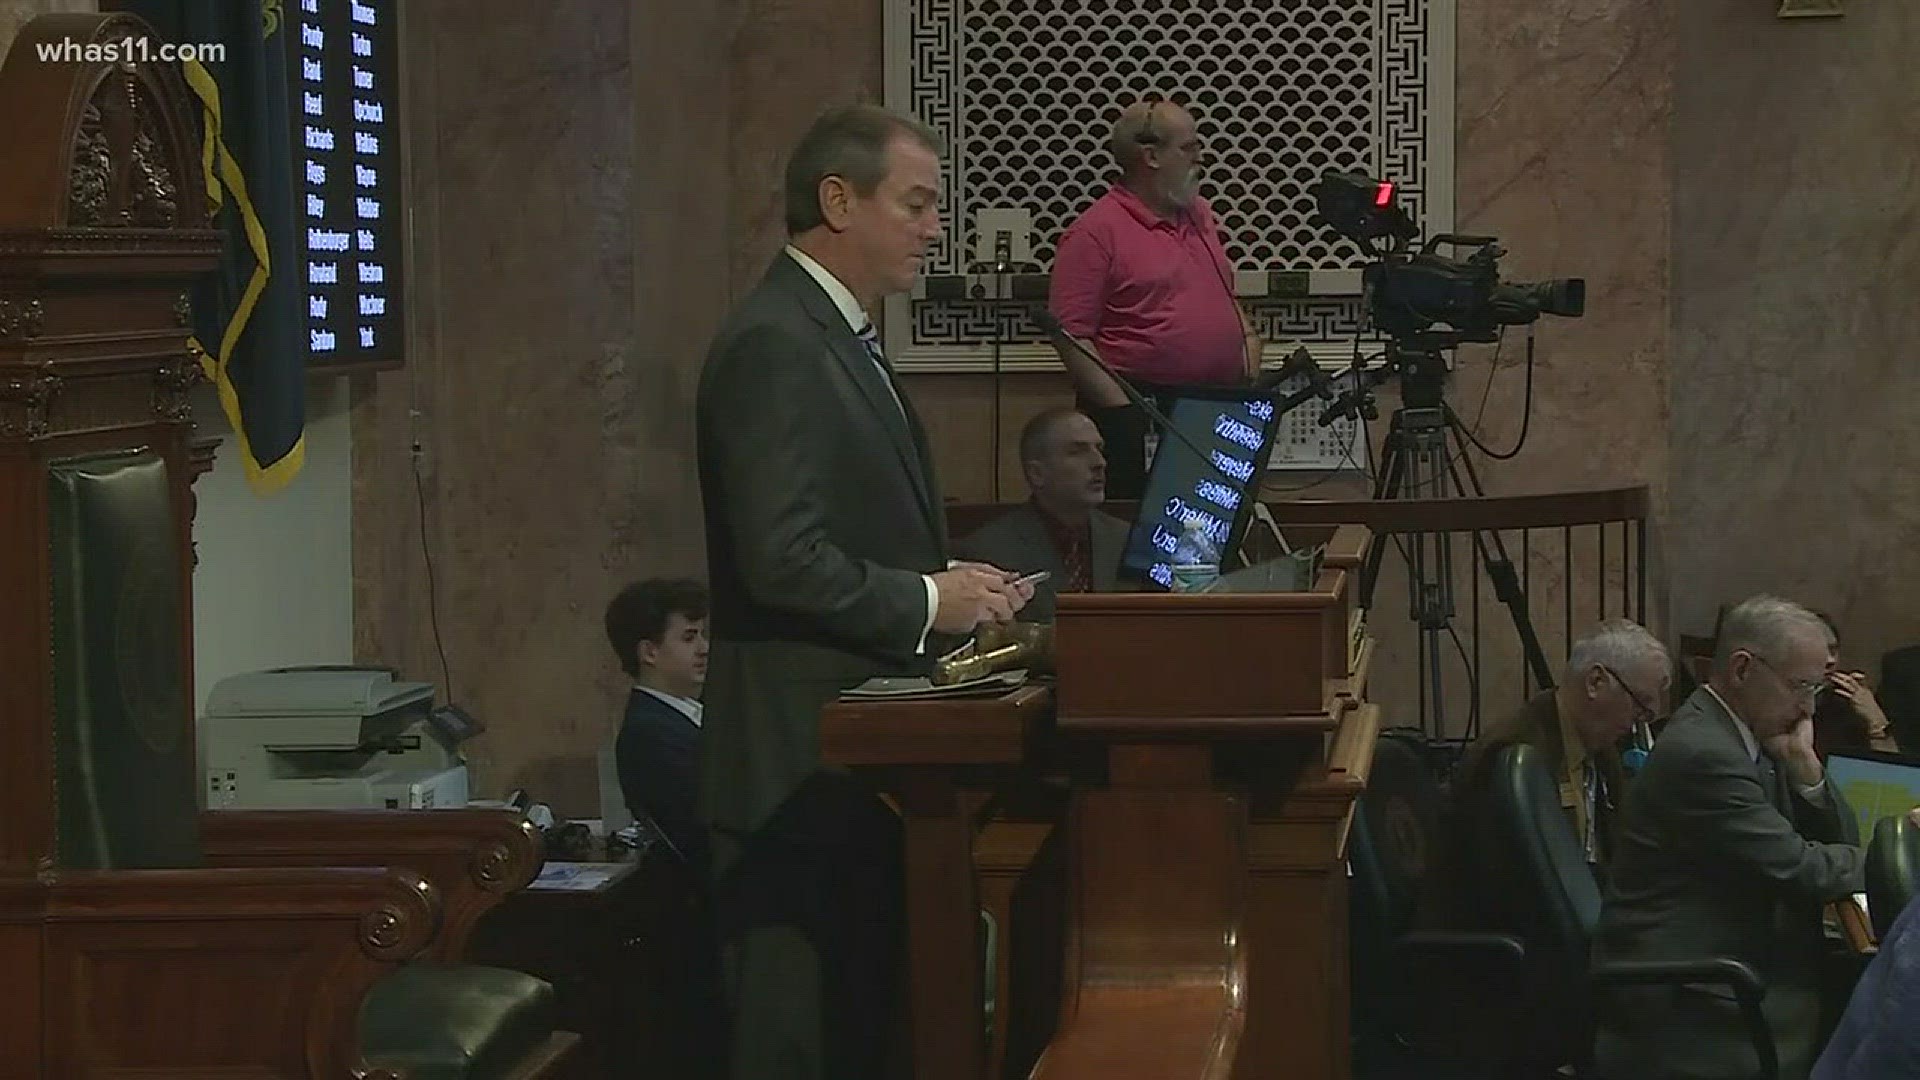 The budget is under discussion in their chamber and today the Senator in charge of the process suggested their plan will look a lot more like Governor Matt Bevin's vision than that of the House.